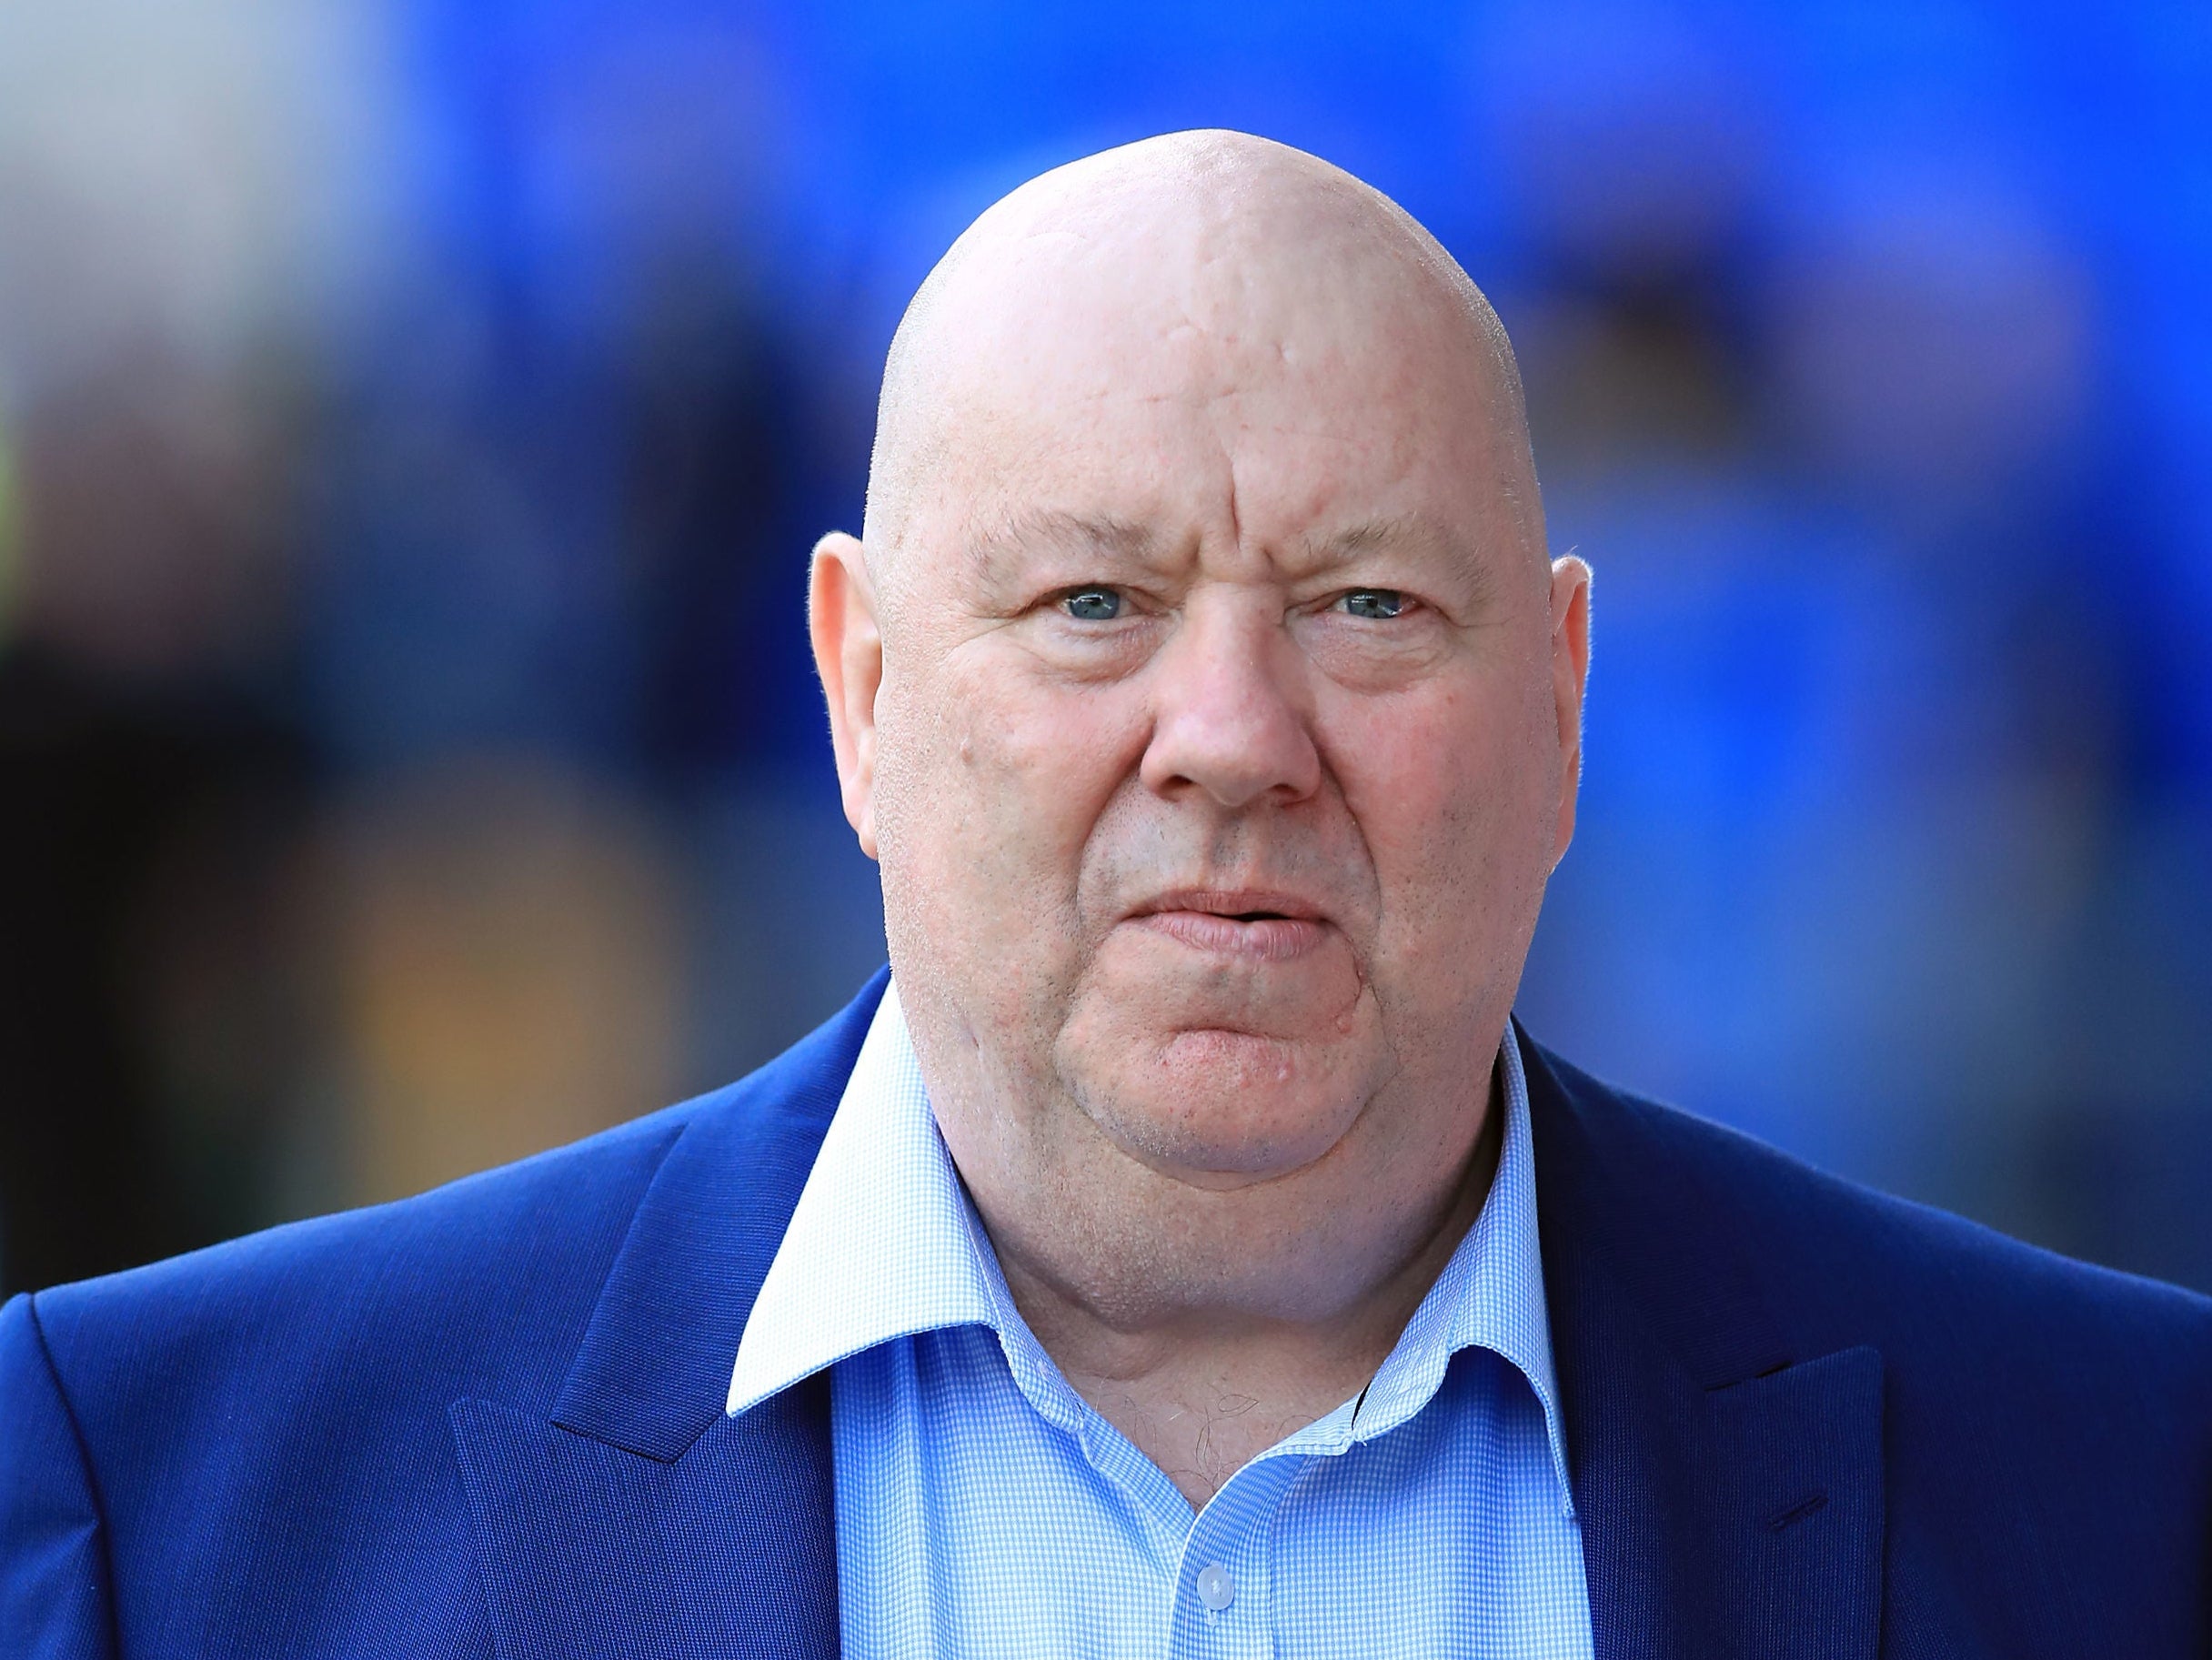 Joe Anderson was suspended by the Labour Party following his arrest